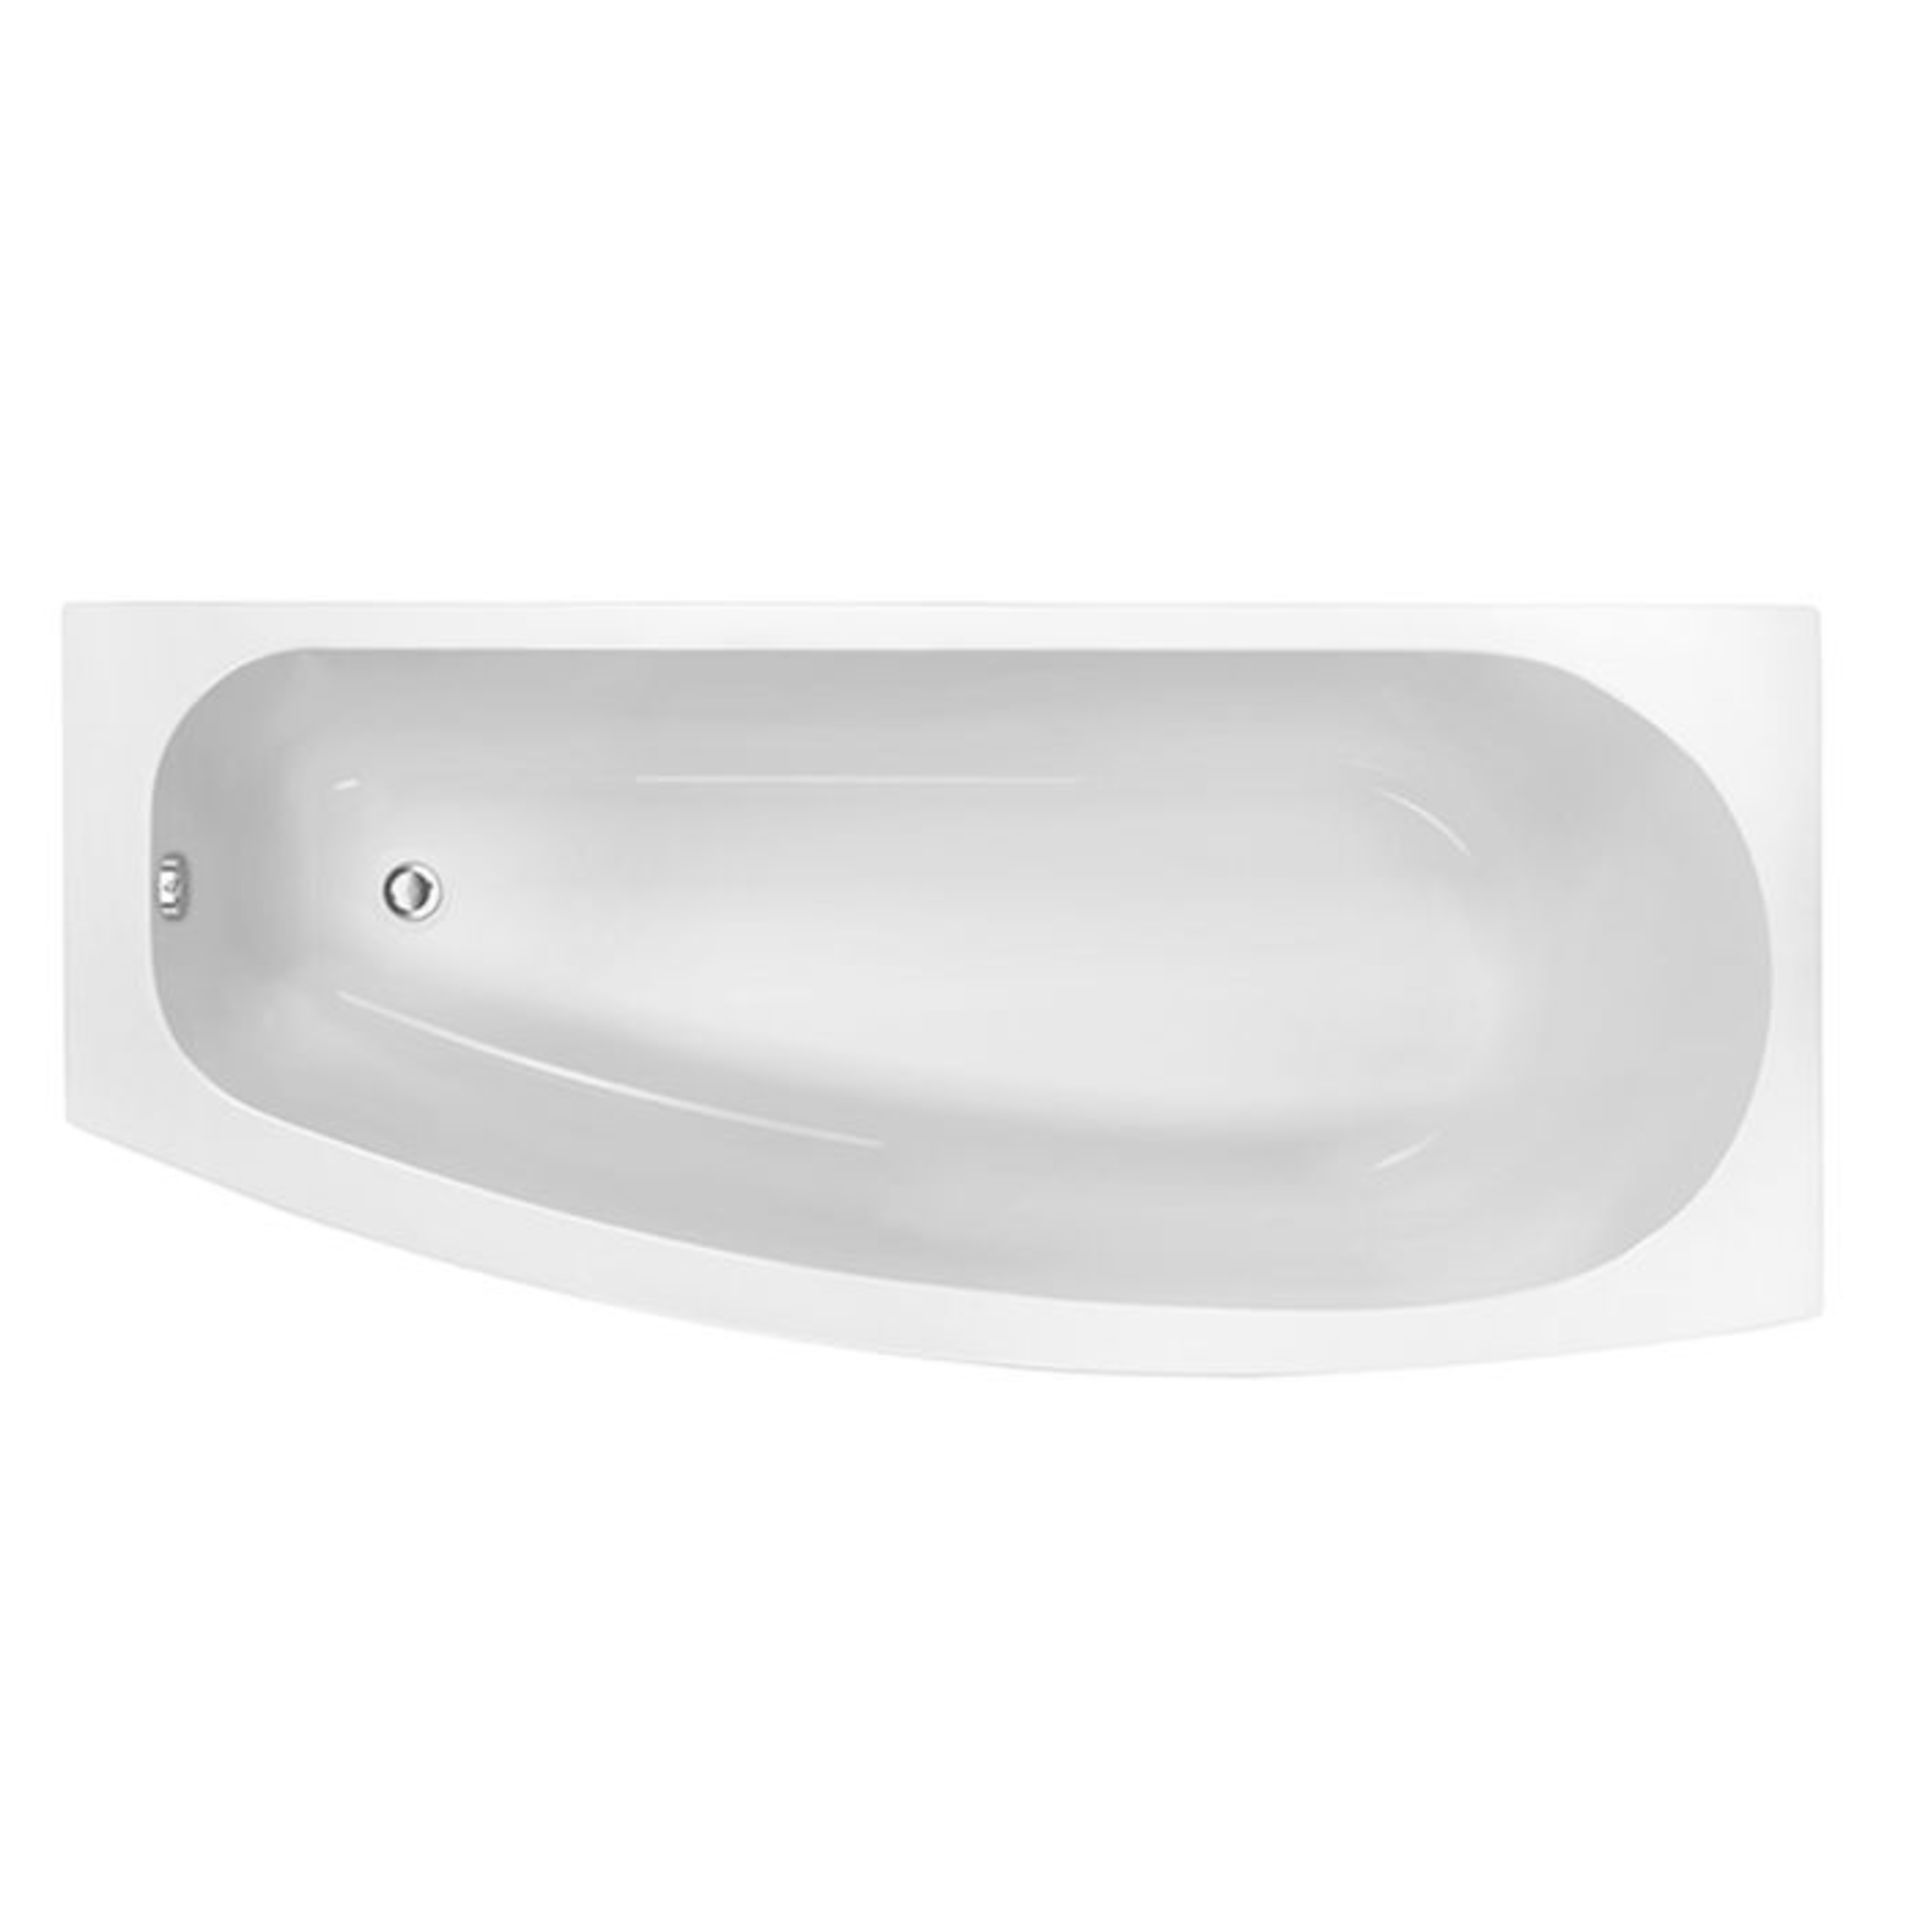 (KL192) 1700mm Left Hand Space Saver Shower Bath Screen Rail & Front Panel (Excludes End Panel). - Image 3 of 3